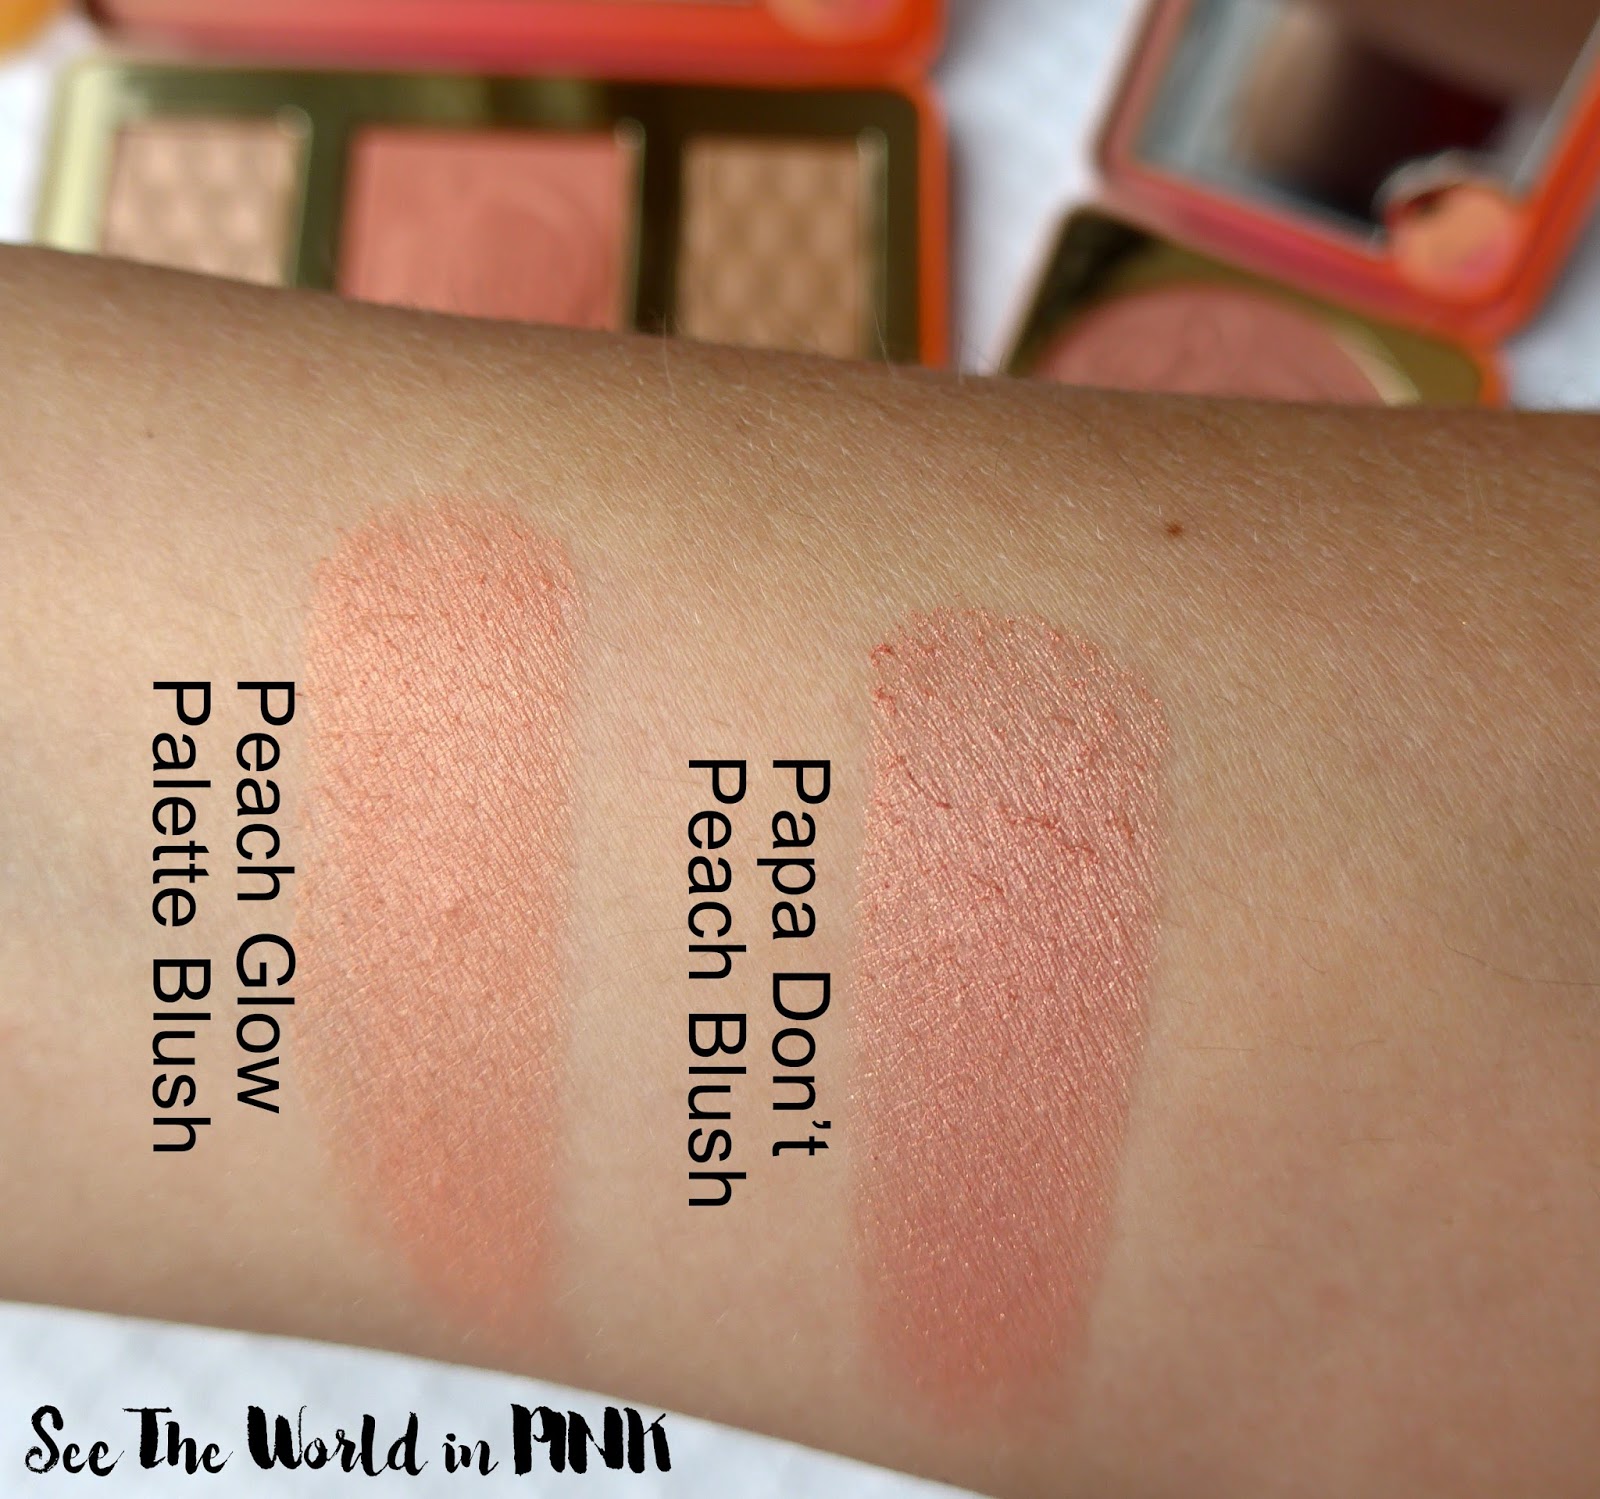 Too Faced Sweet Peach Glow Peach-Infused Highlighting Palette - Swatches and Review!